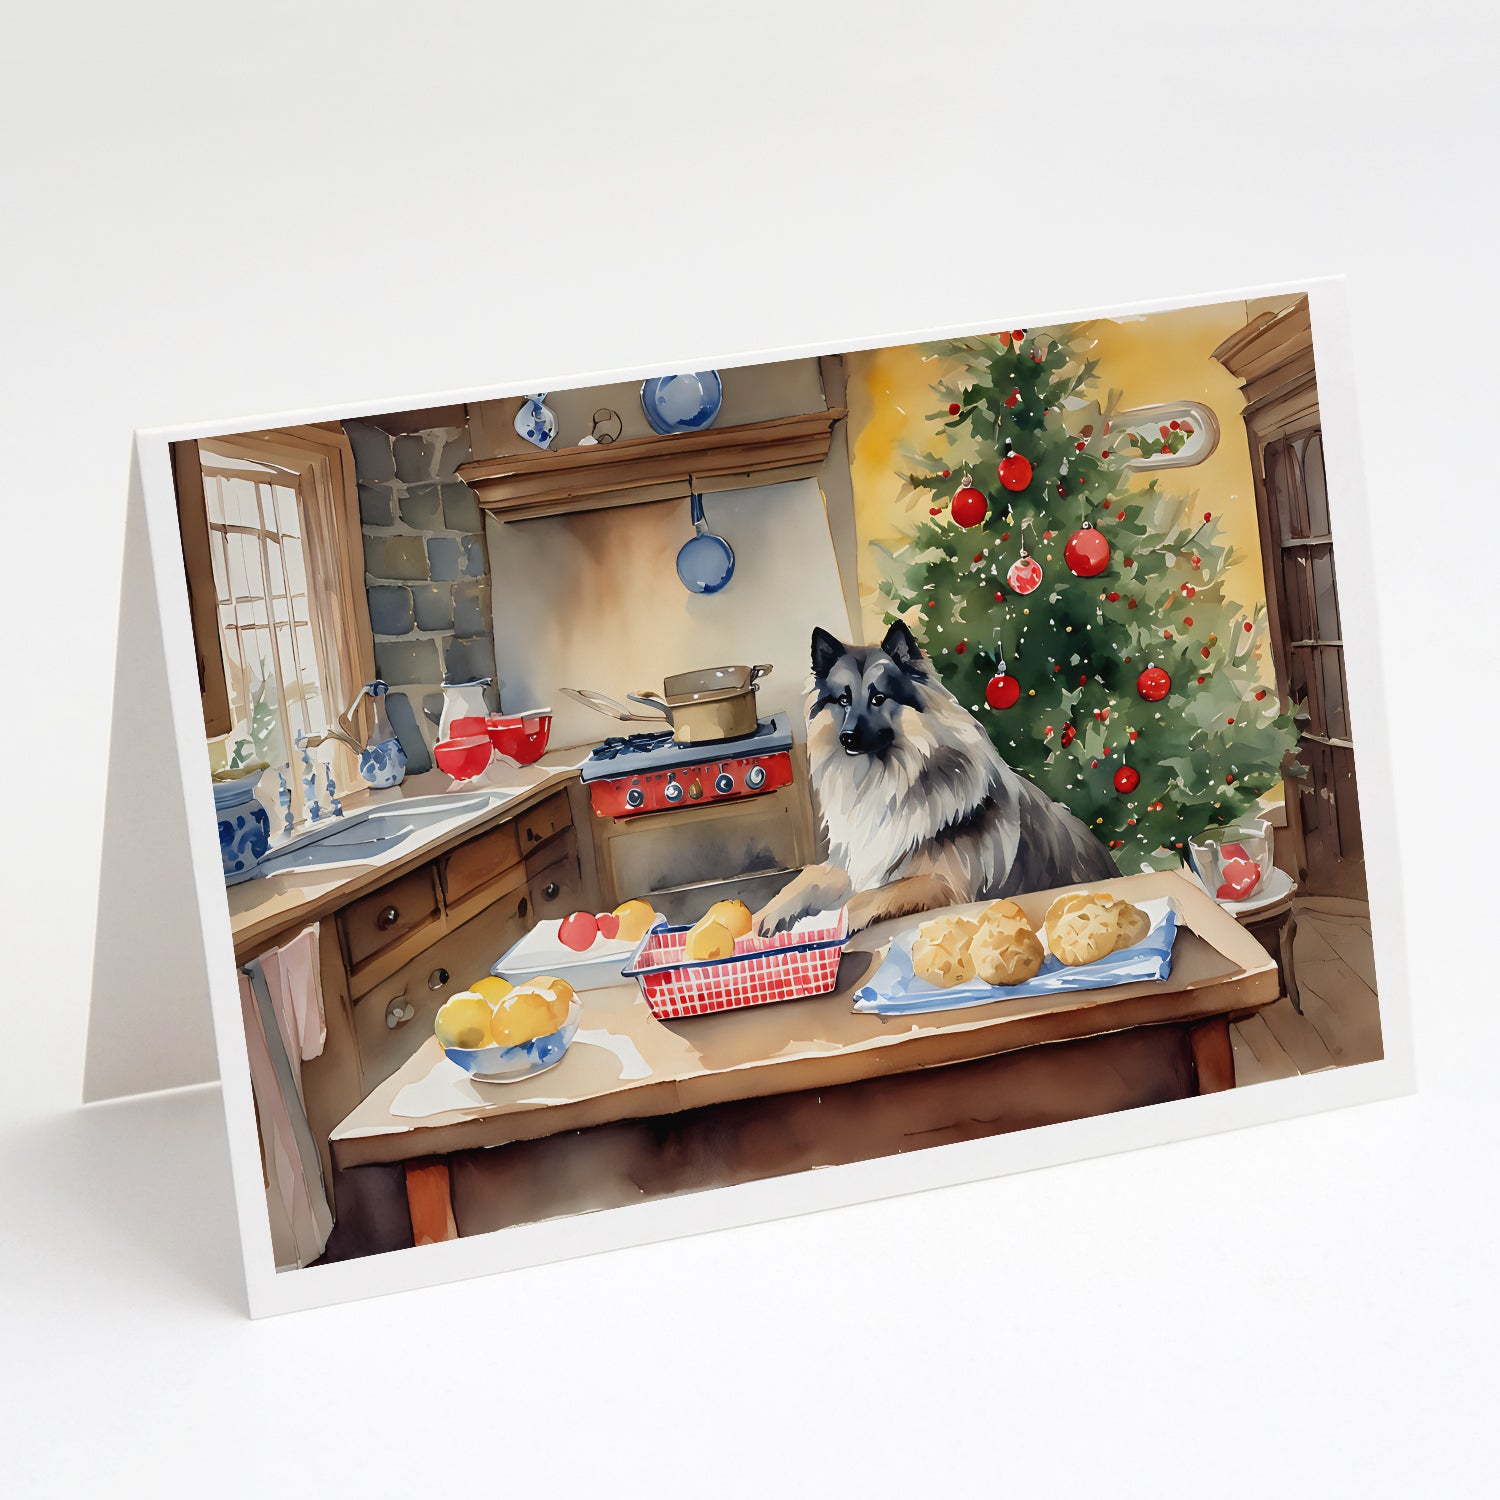 Buy this Keeshond Christmas Cookies Greeting Cards Pack of 8